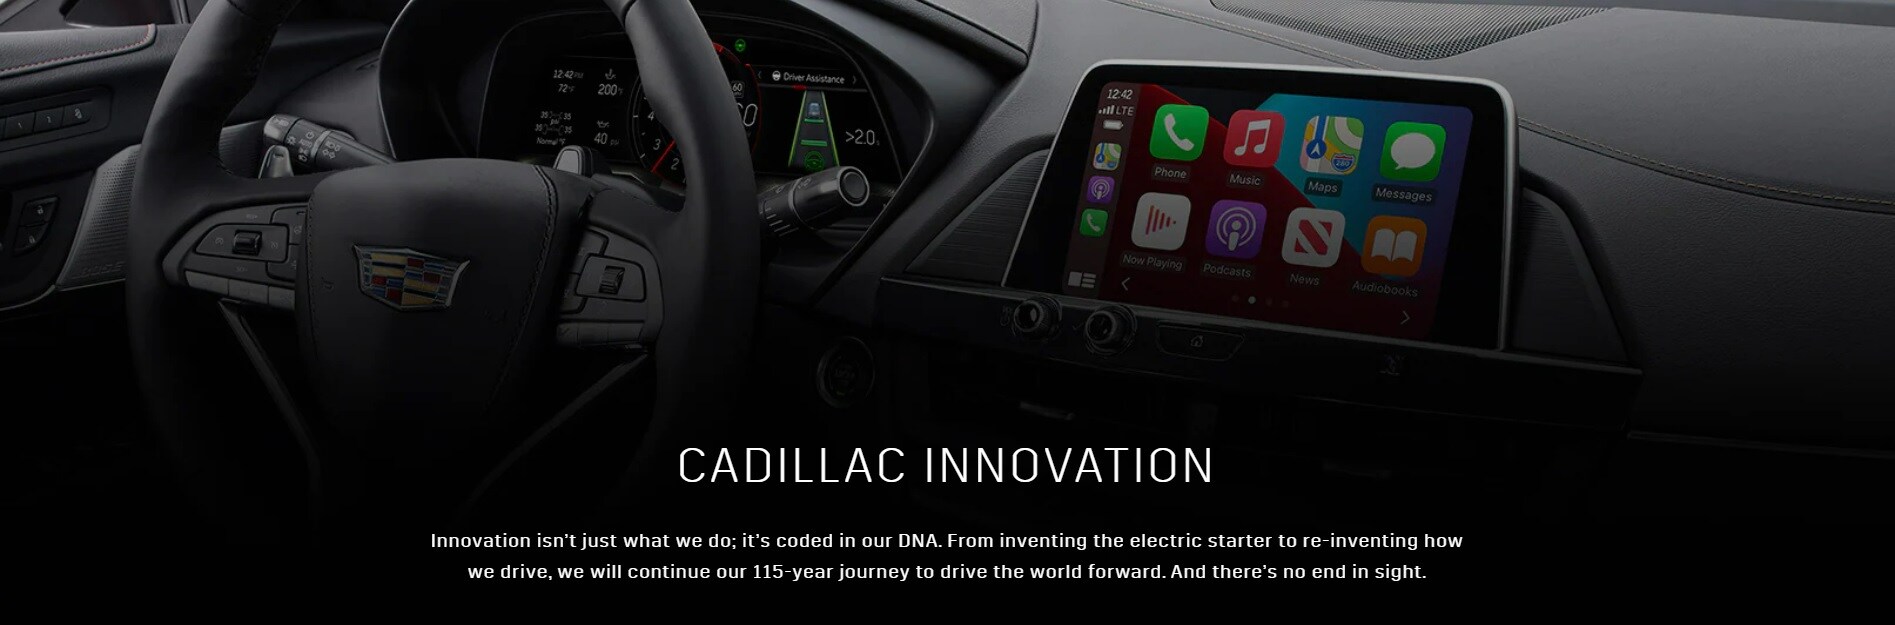 Cadillac Innovation For A Better Driving Experience.jpg